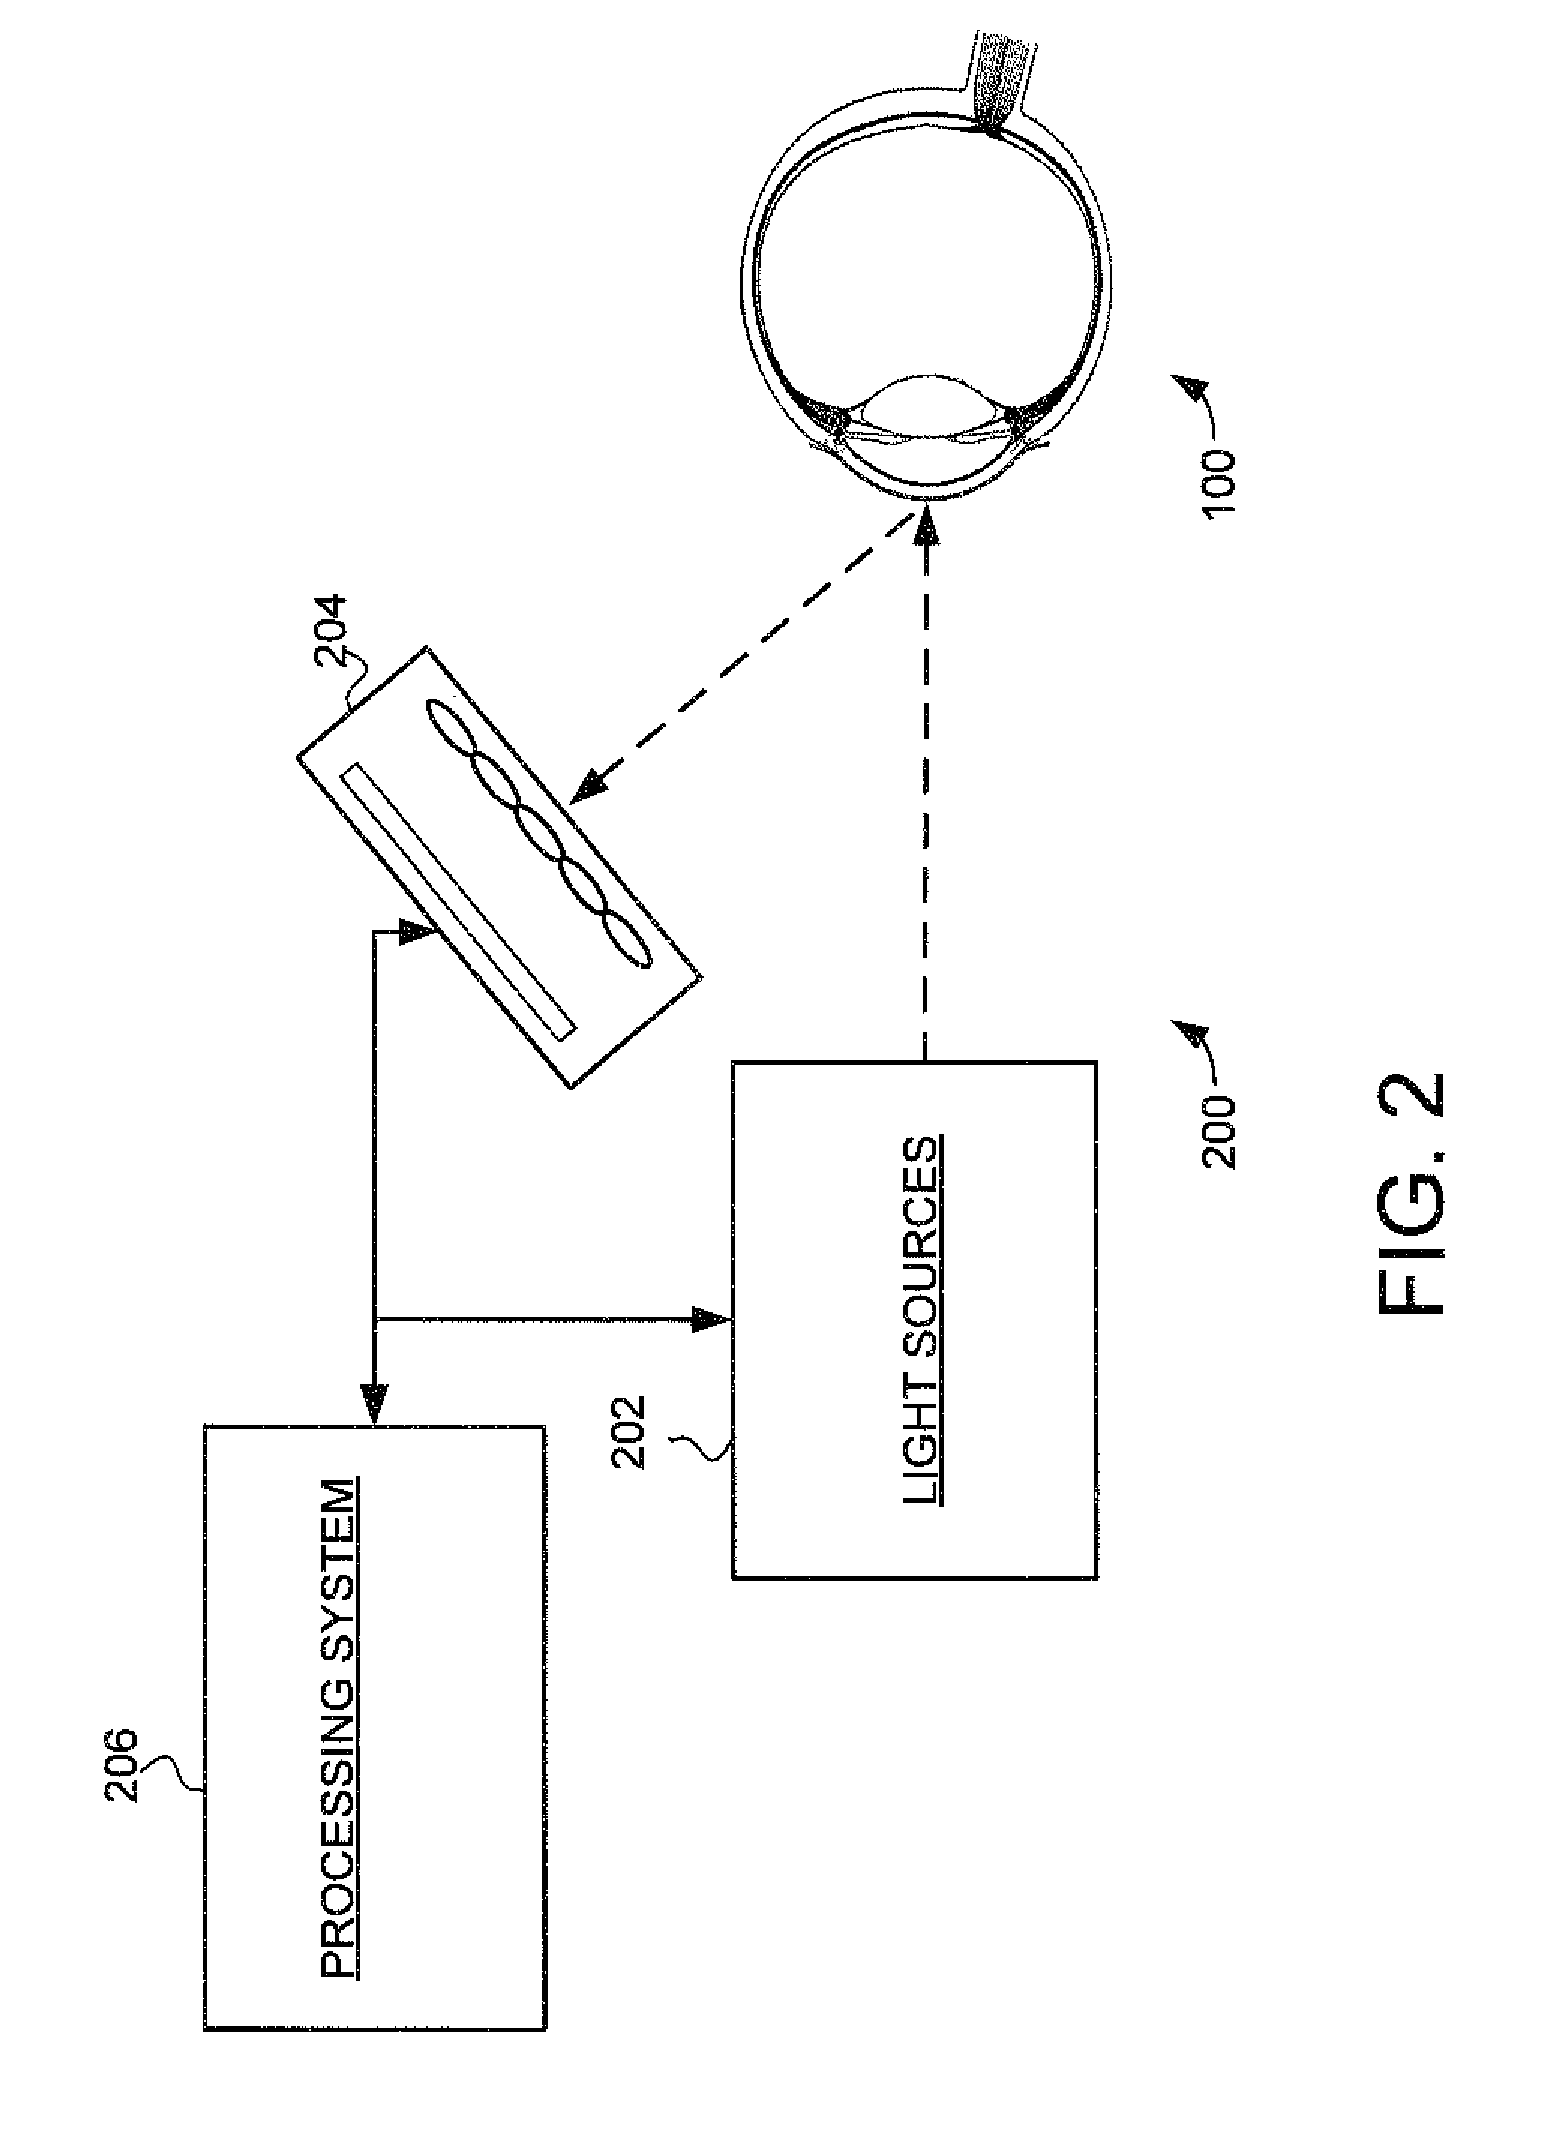 System and method for corneal pachymetry using plenoptic imaging